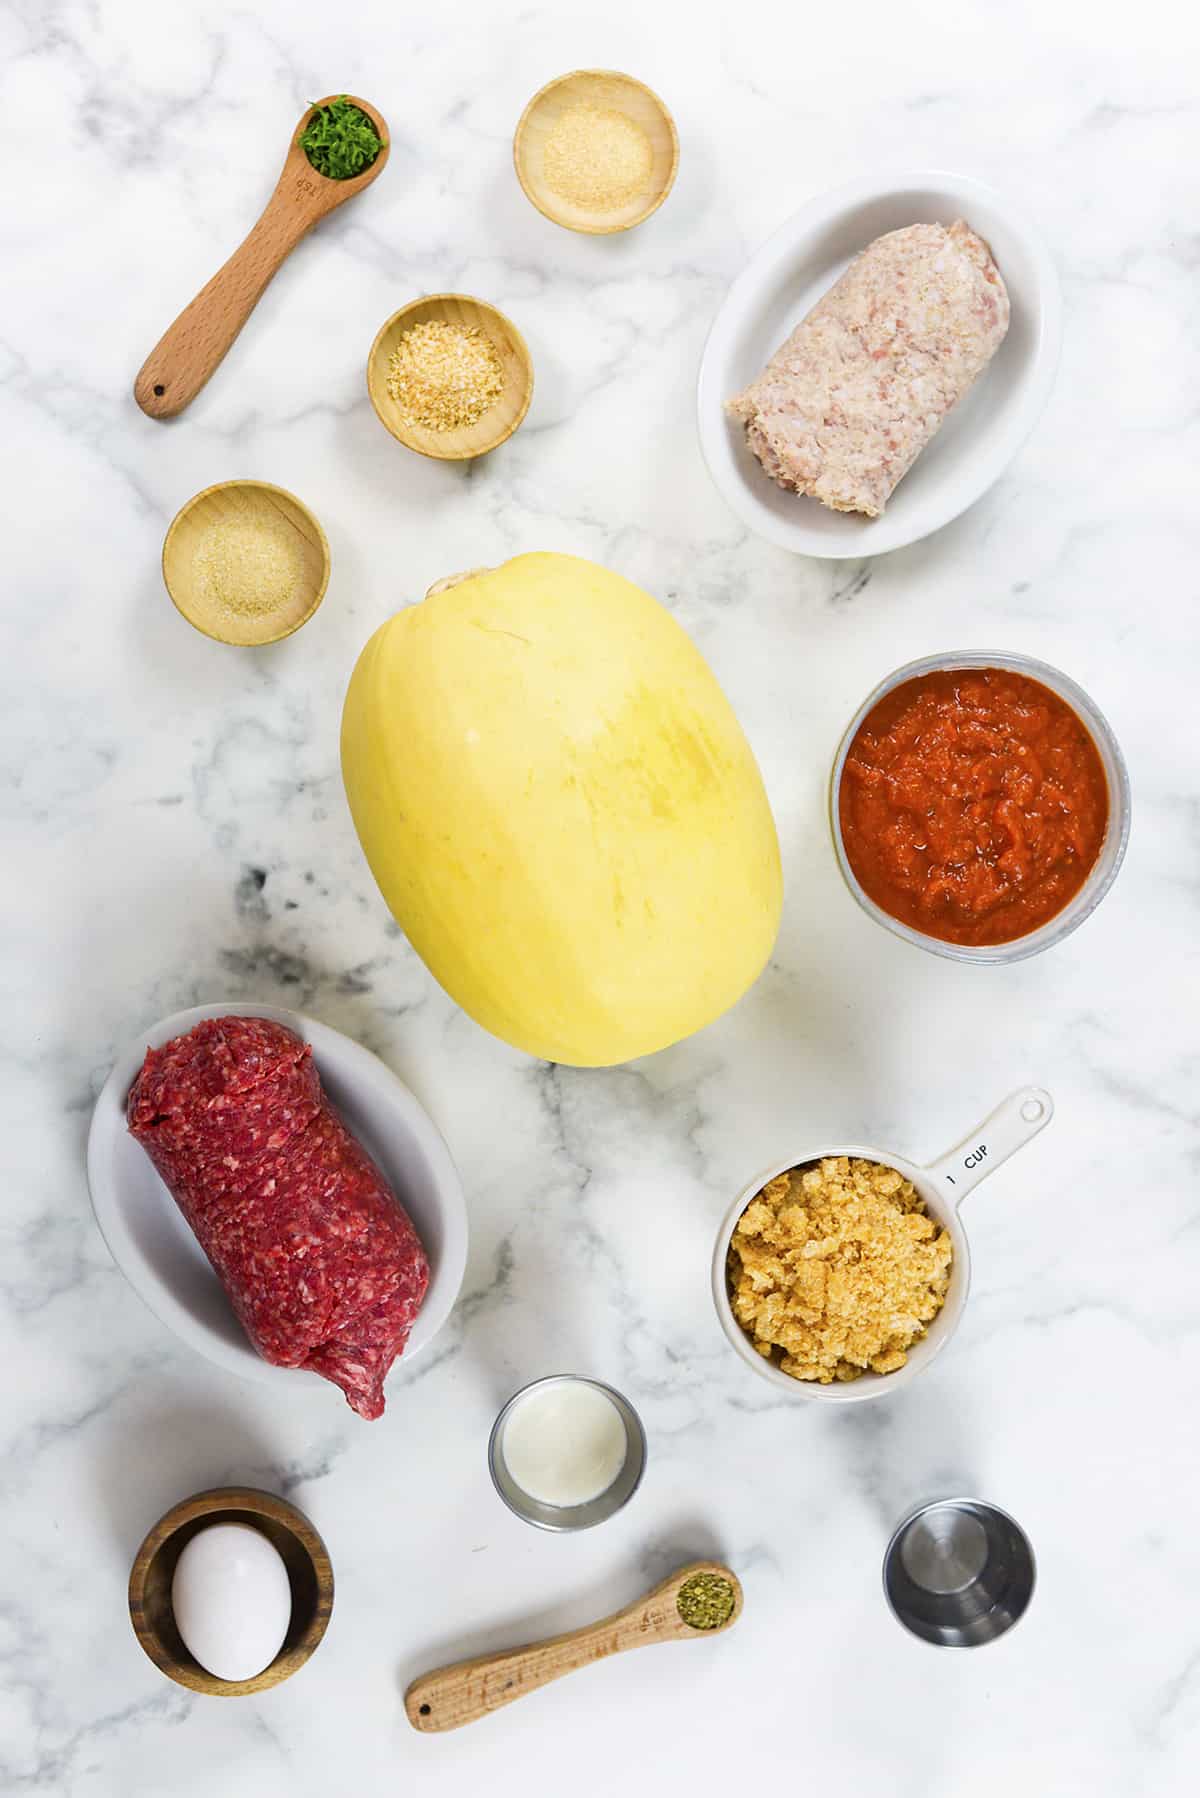 Ingredients for spaghetti squash with meatballs.